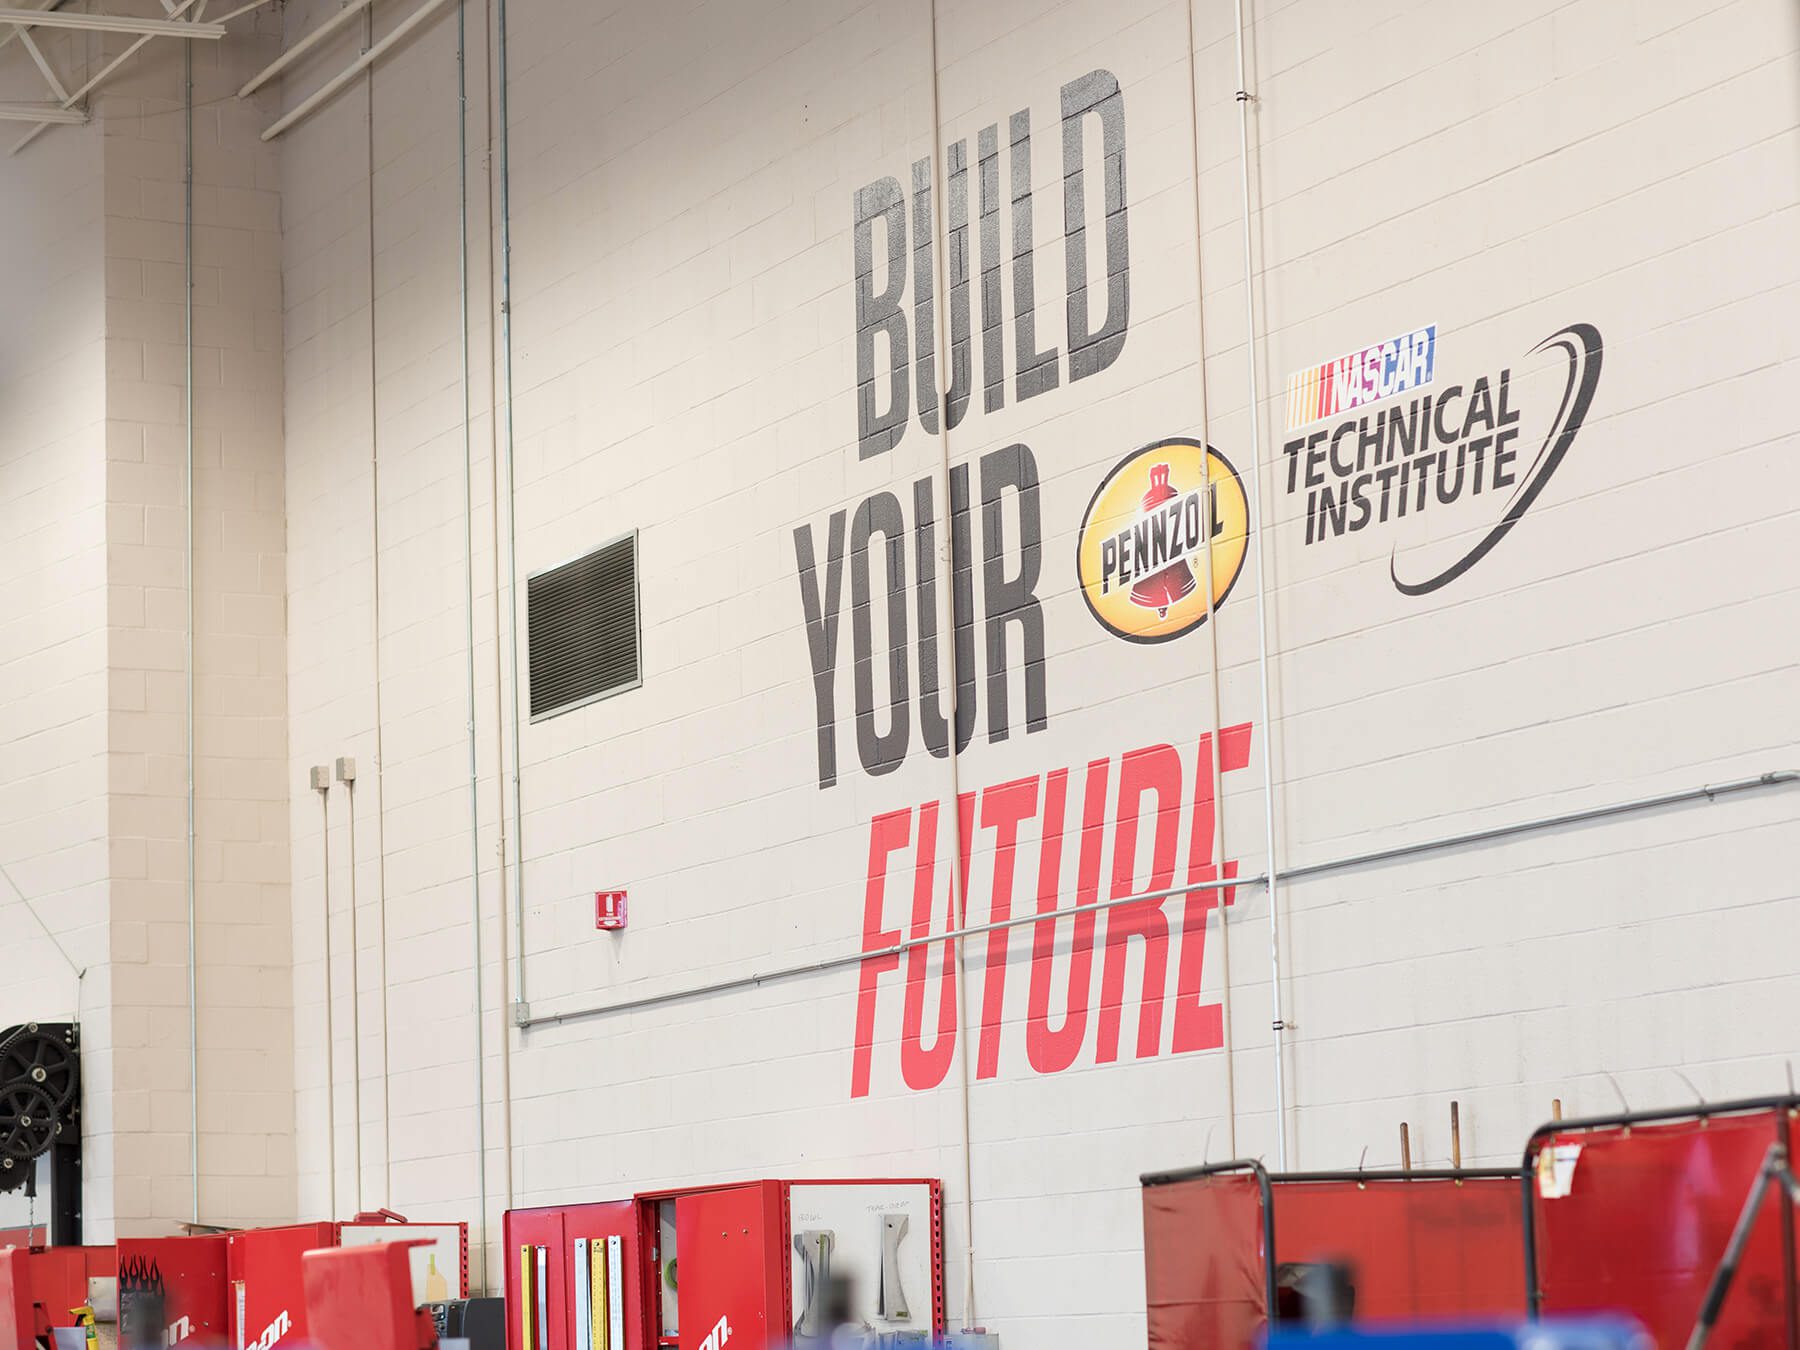 NASCAR-Technical-Institute-interior with 'Build Your Future' on wall